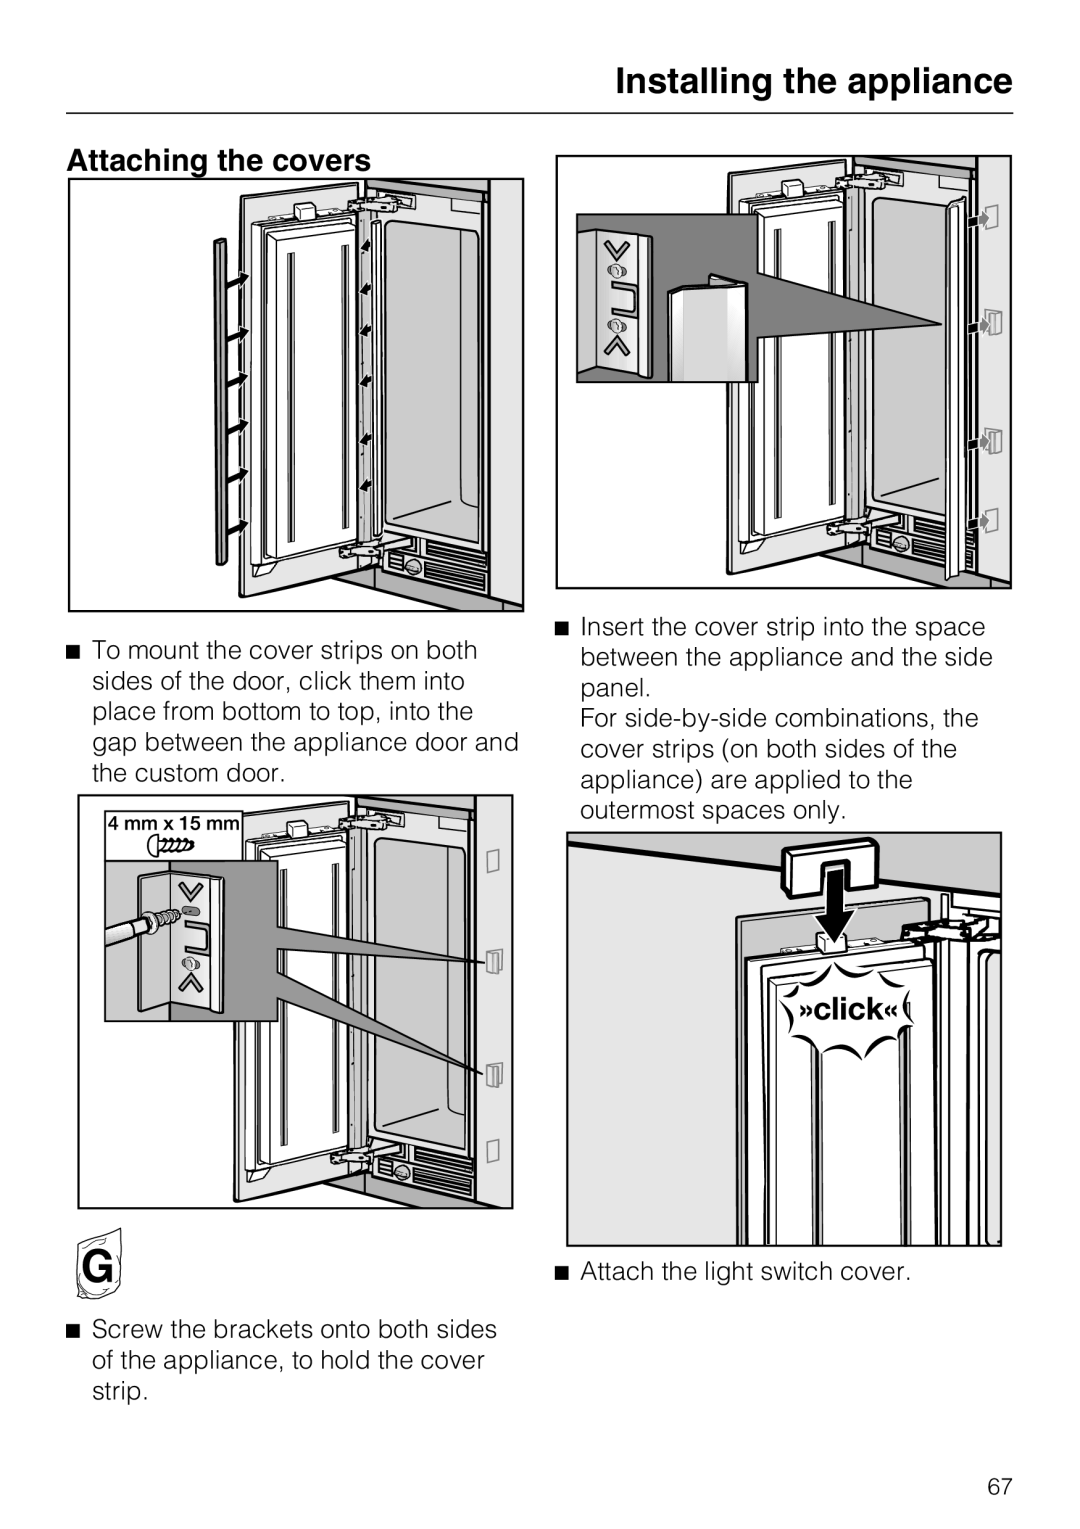 Miele F 1411 Vi installation instructions Attaching the covers, Installing the appliance 